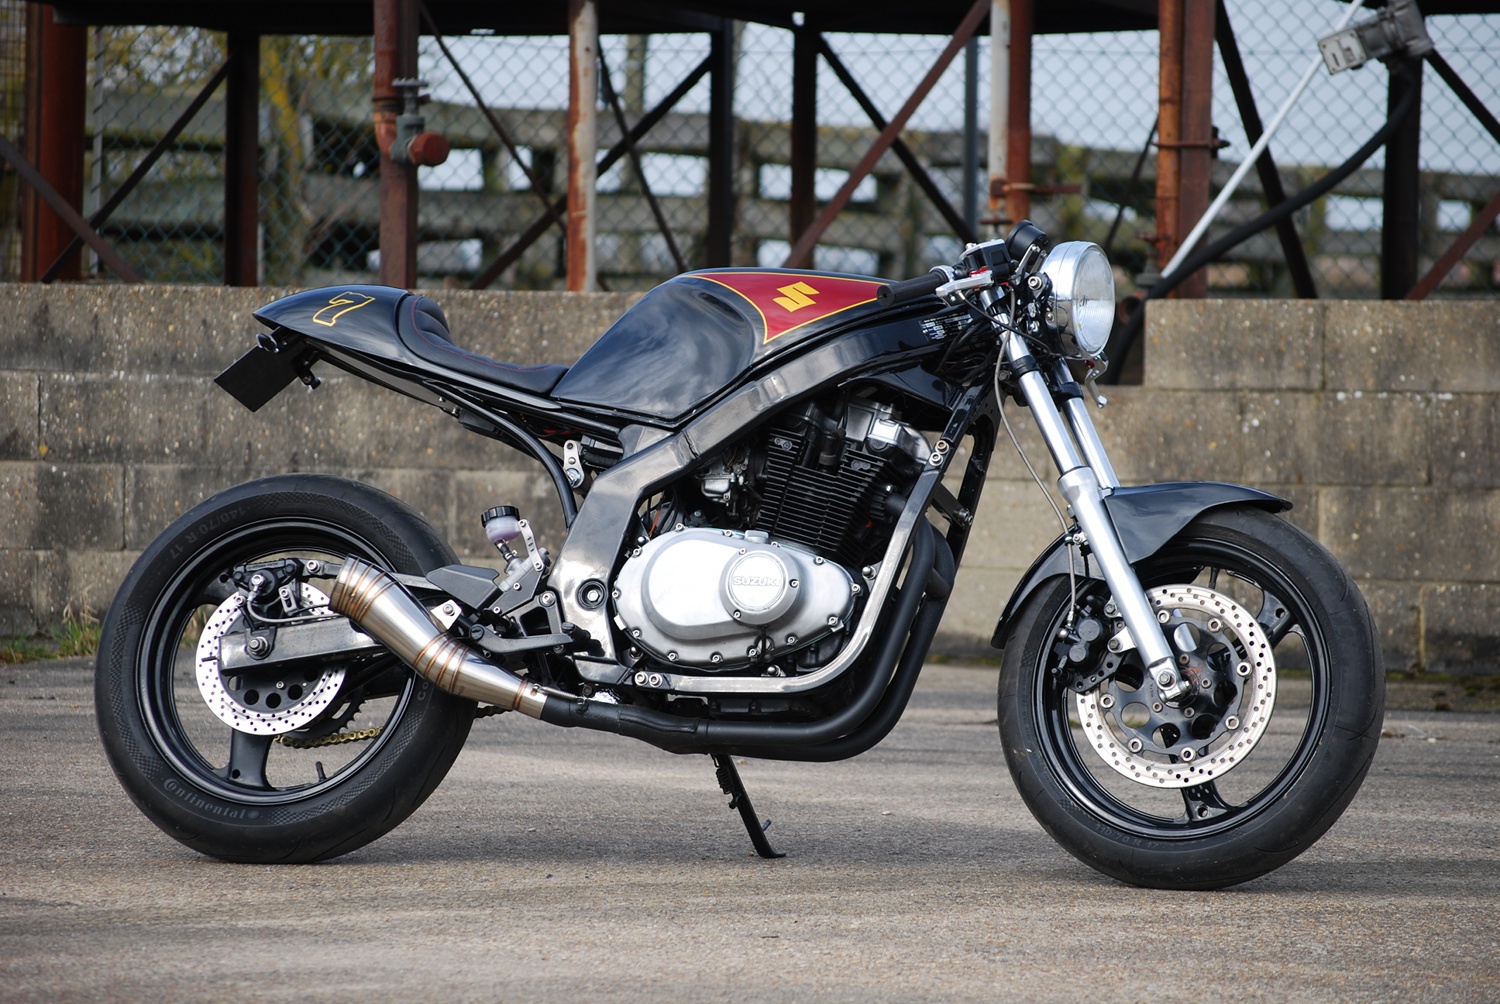 GS500 Cafe Racer Project: In the Builder’s Words.